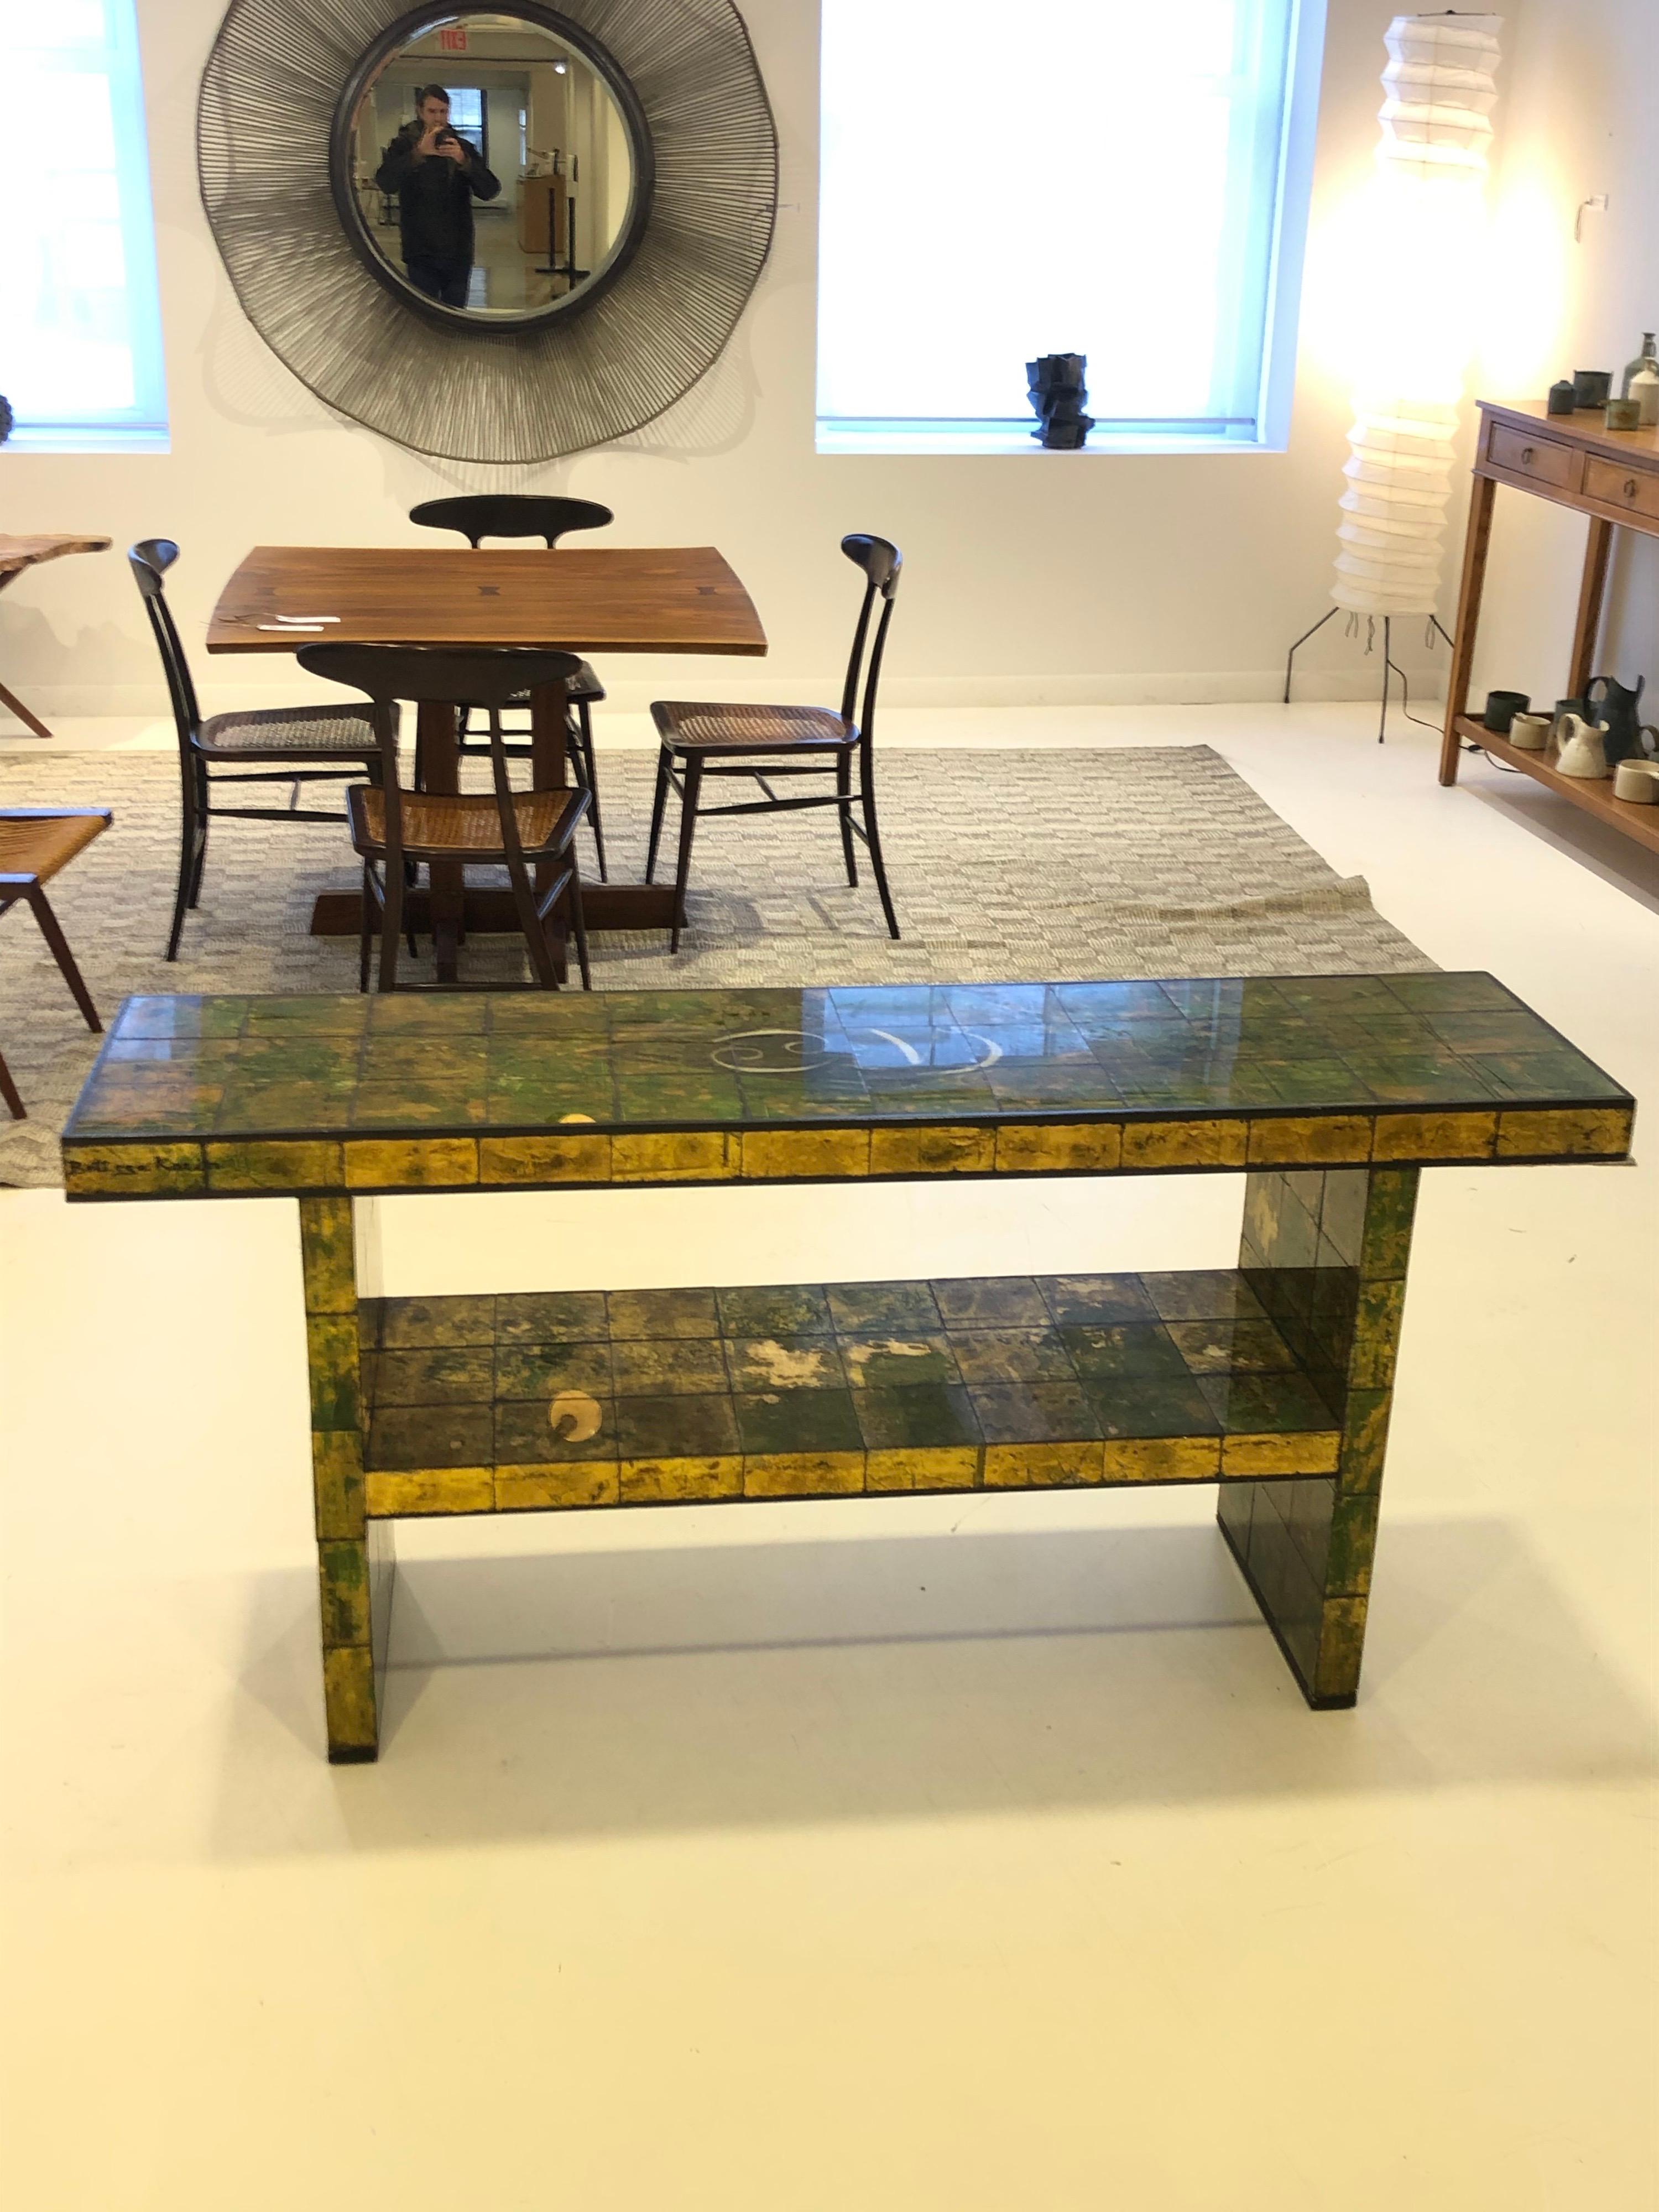 circa 1940, USA, the mosaic tile-clad two-tier table reverse painted in a gold leaf, green and black mottled abstracted design, by artist Karin van Leyden. A rare and elegant collaboration by the legendary Hollywood Society architect-designer and